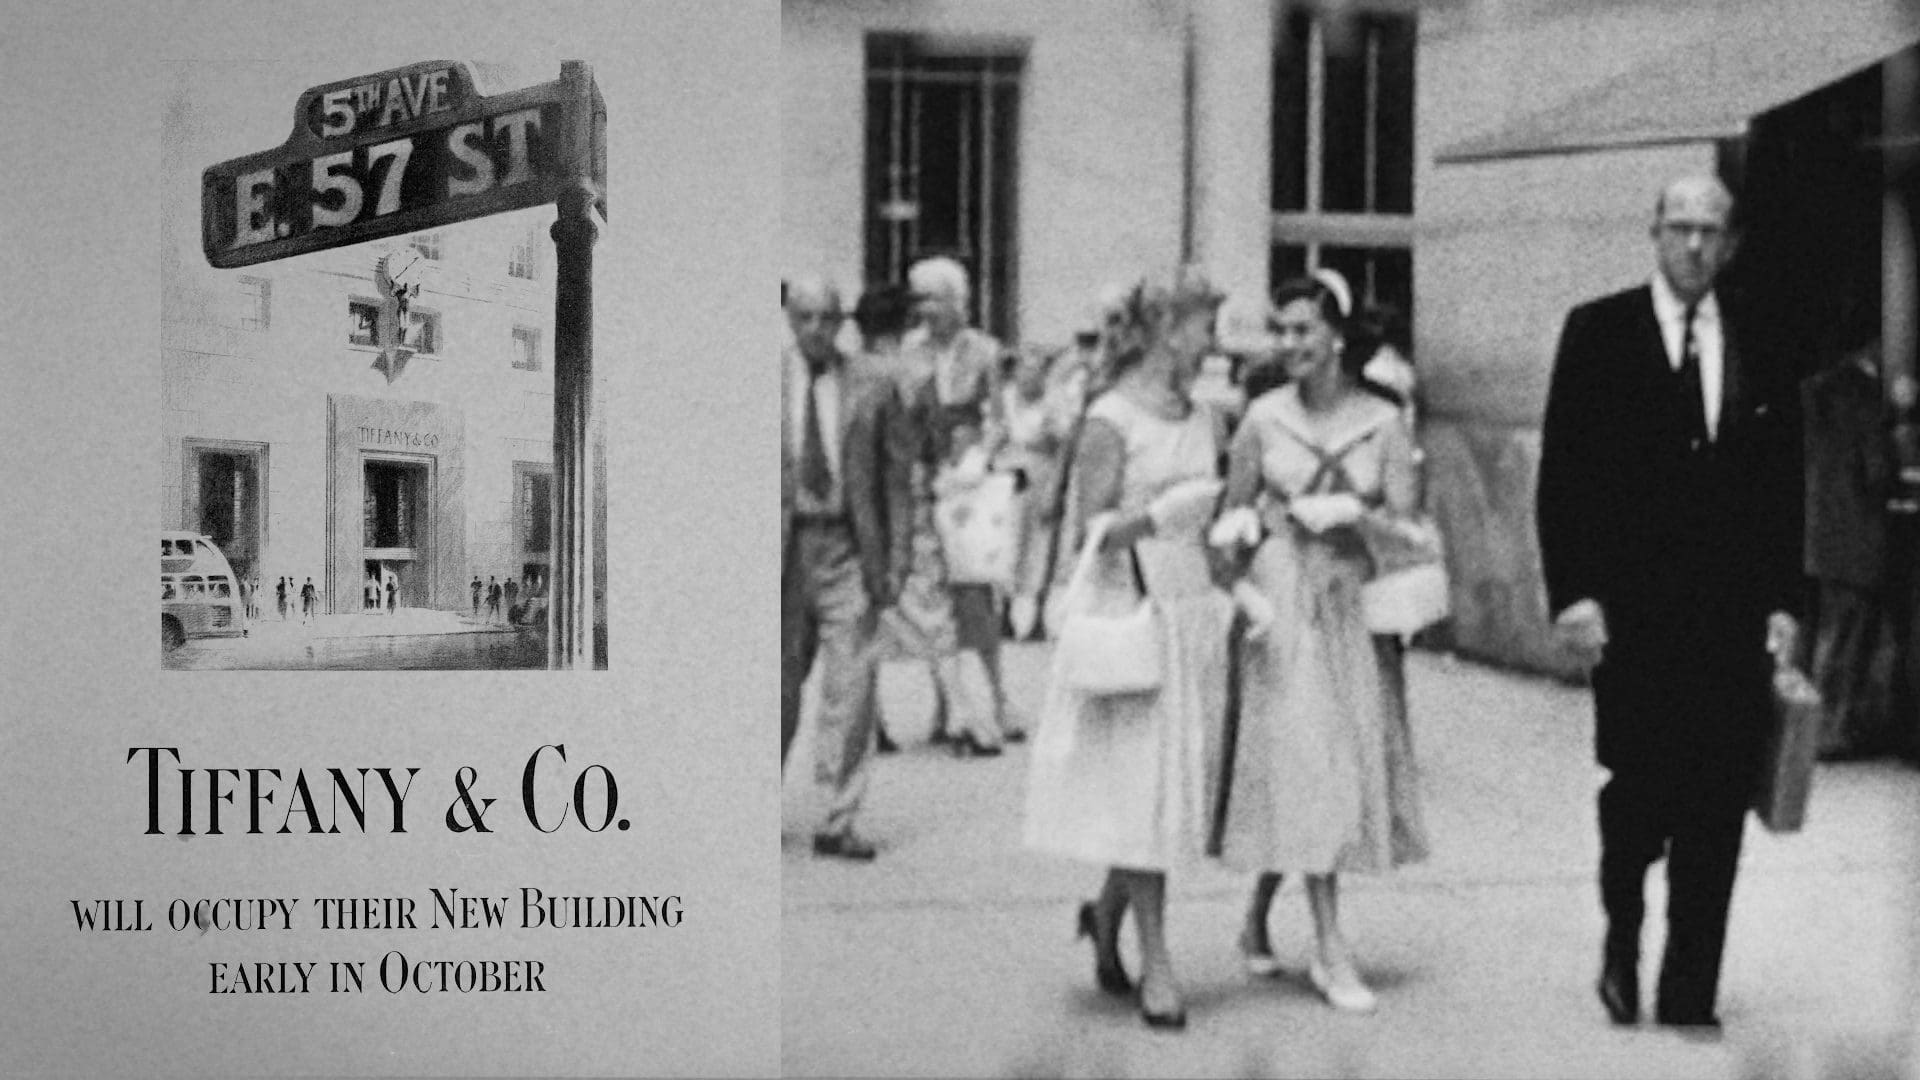 Vintage black and white promotional image announcing Tiffany & Co.'s move to their new building, featuring a street sign of 5th Ave and E. 57th St and an illustration of the store's façade, with pedestrians from the era in the foreground.